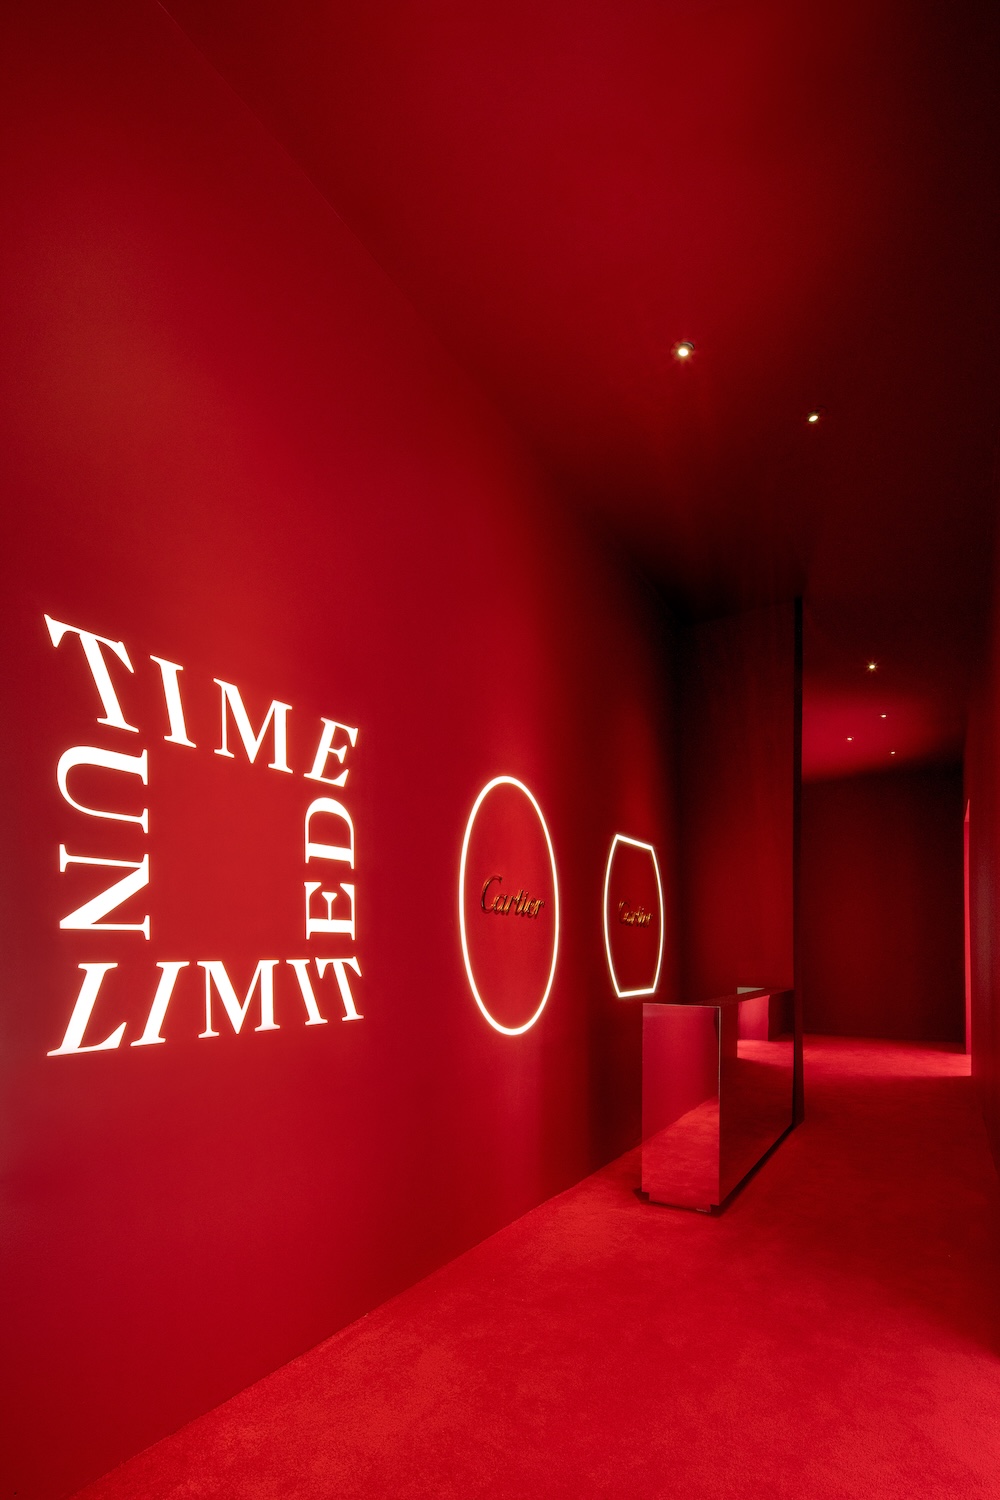 Cartier Time Unlimited Exhibition at Art Basel Miami Beach 2023 - Entrance